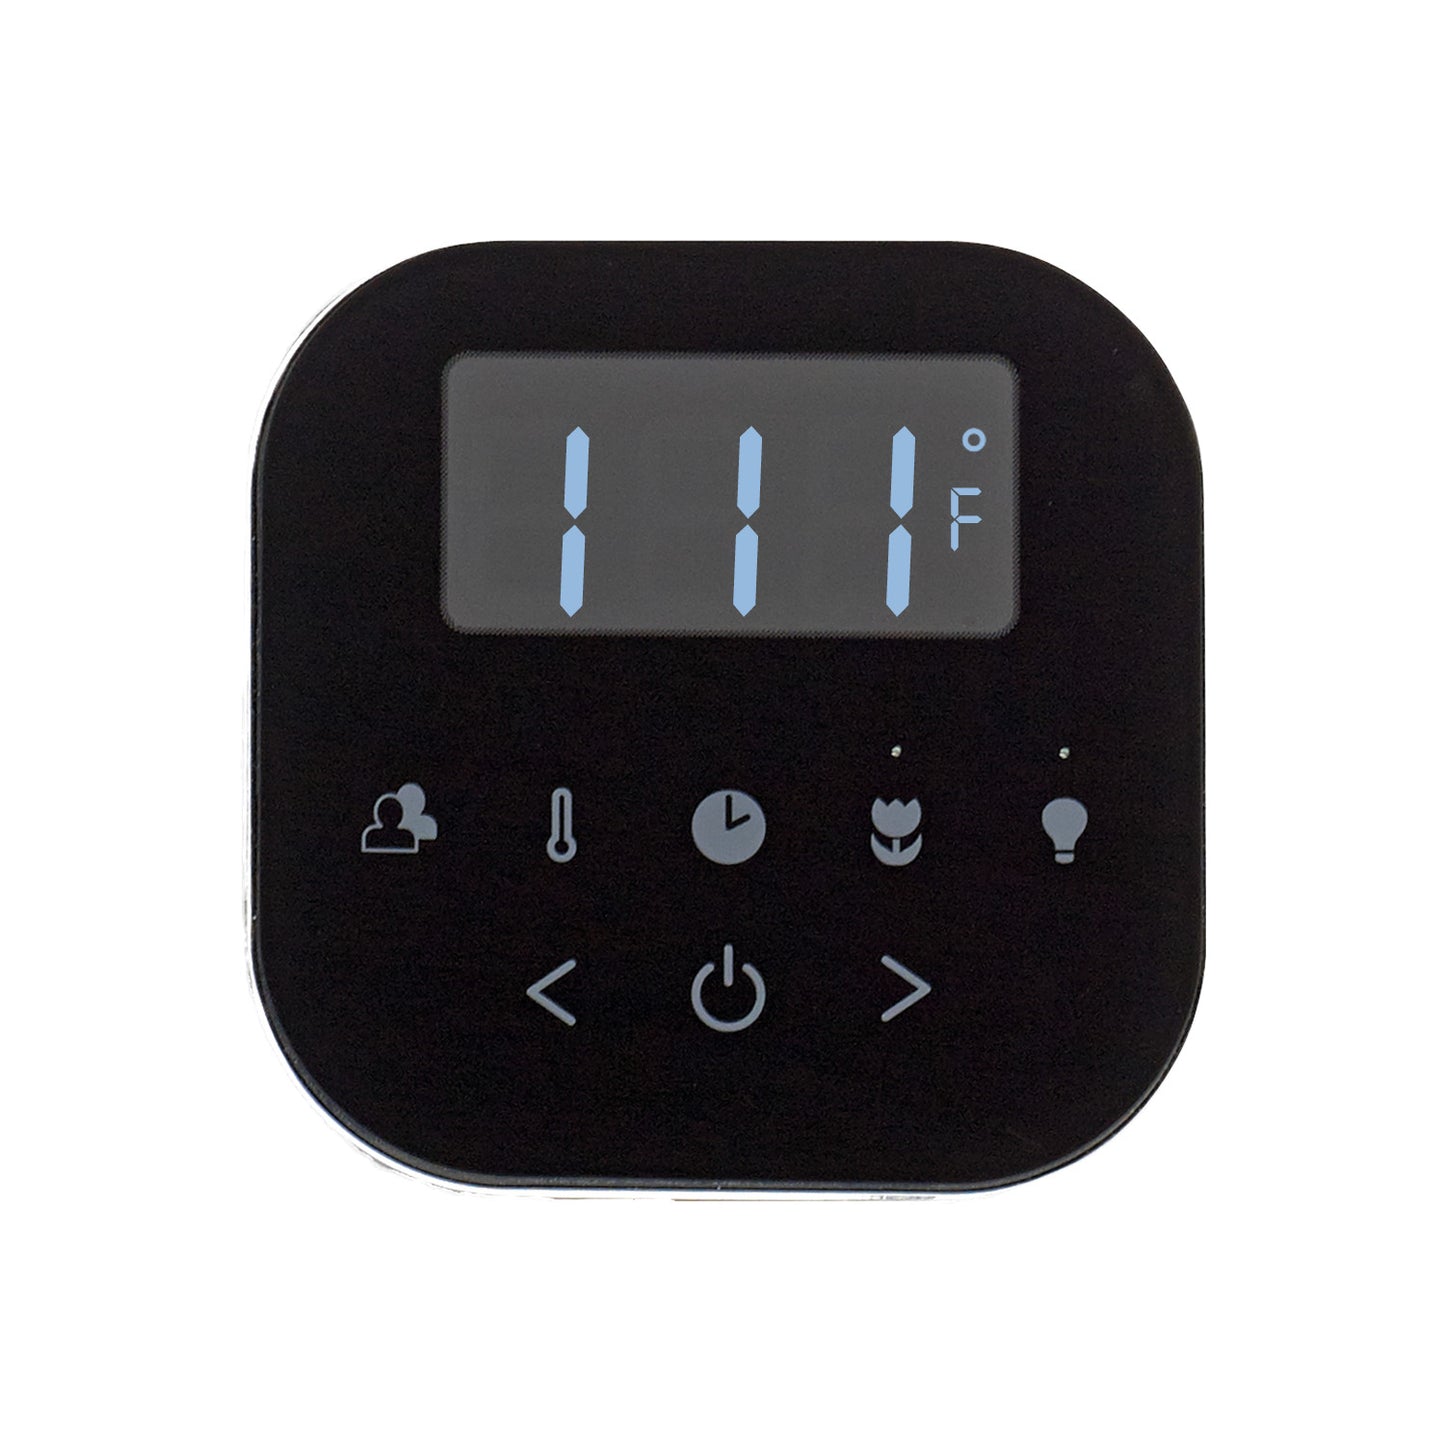 AirTempo Steam Shower Control in Black with Polished Brass